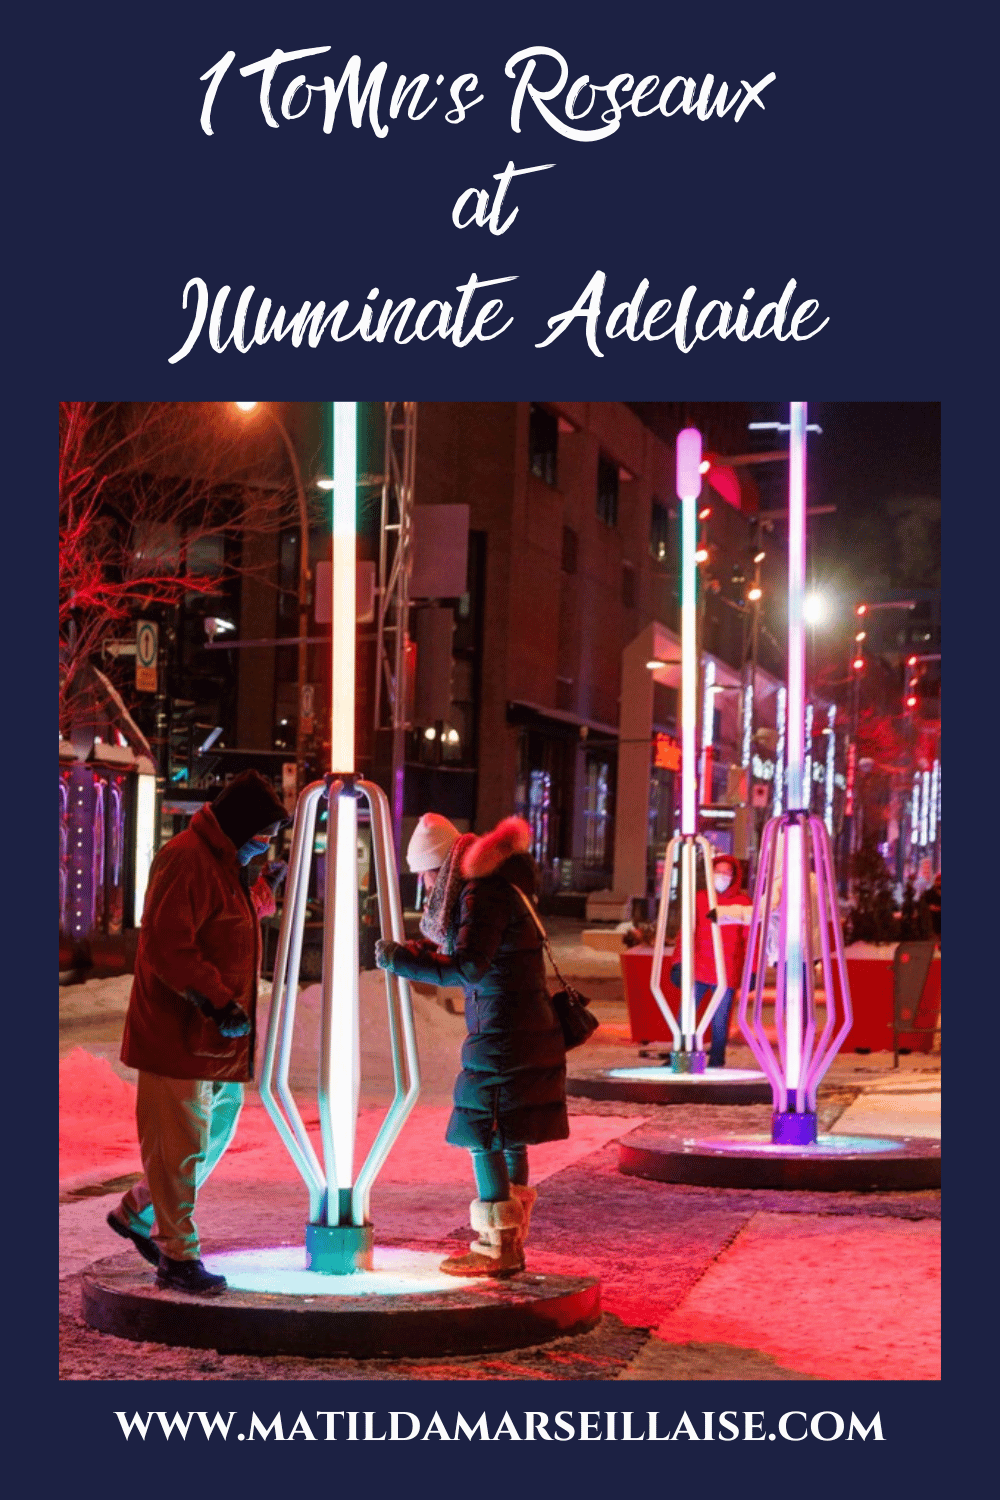 Go see Roseaux, the particip-active installation from Quebecois companies One Touch of Madness and UDO at Illuminate Adelaide